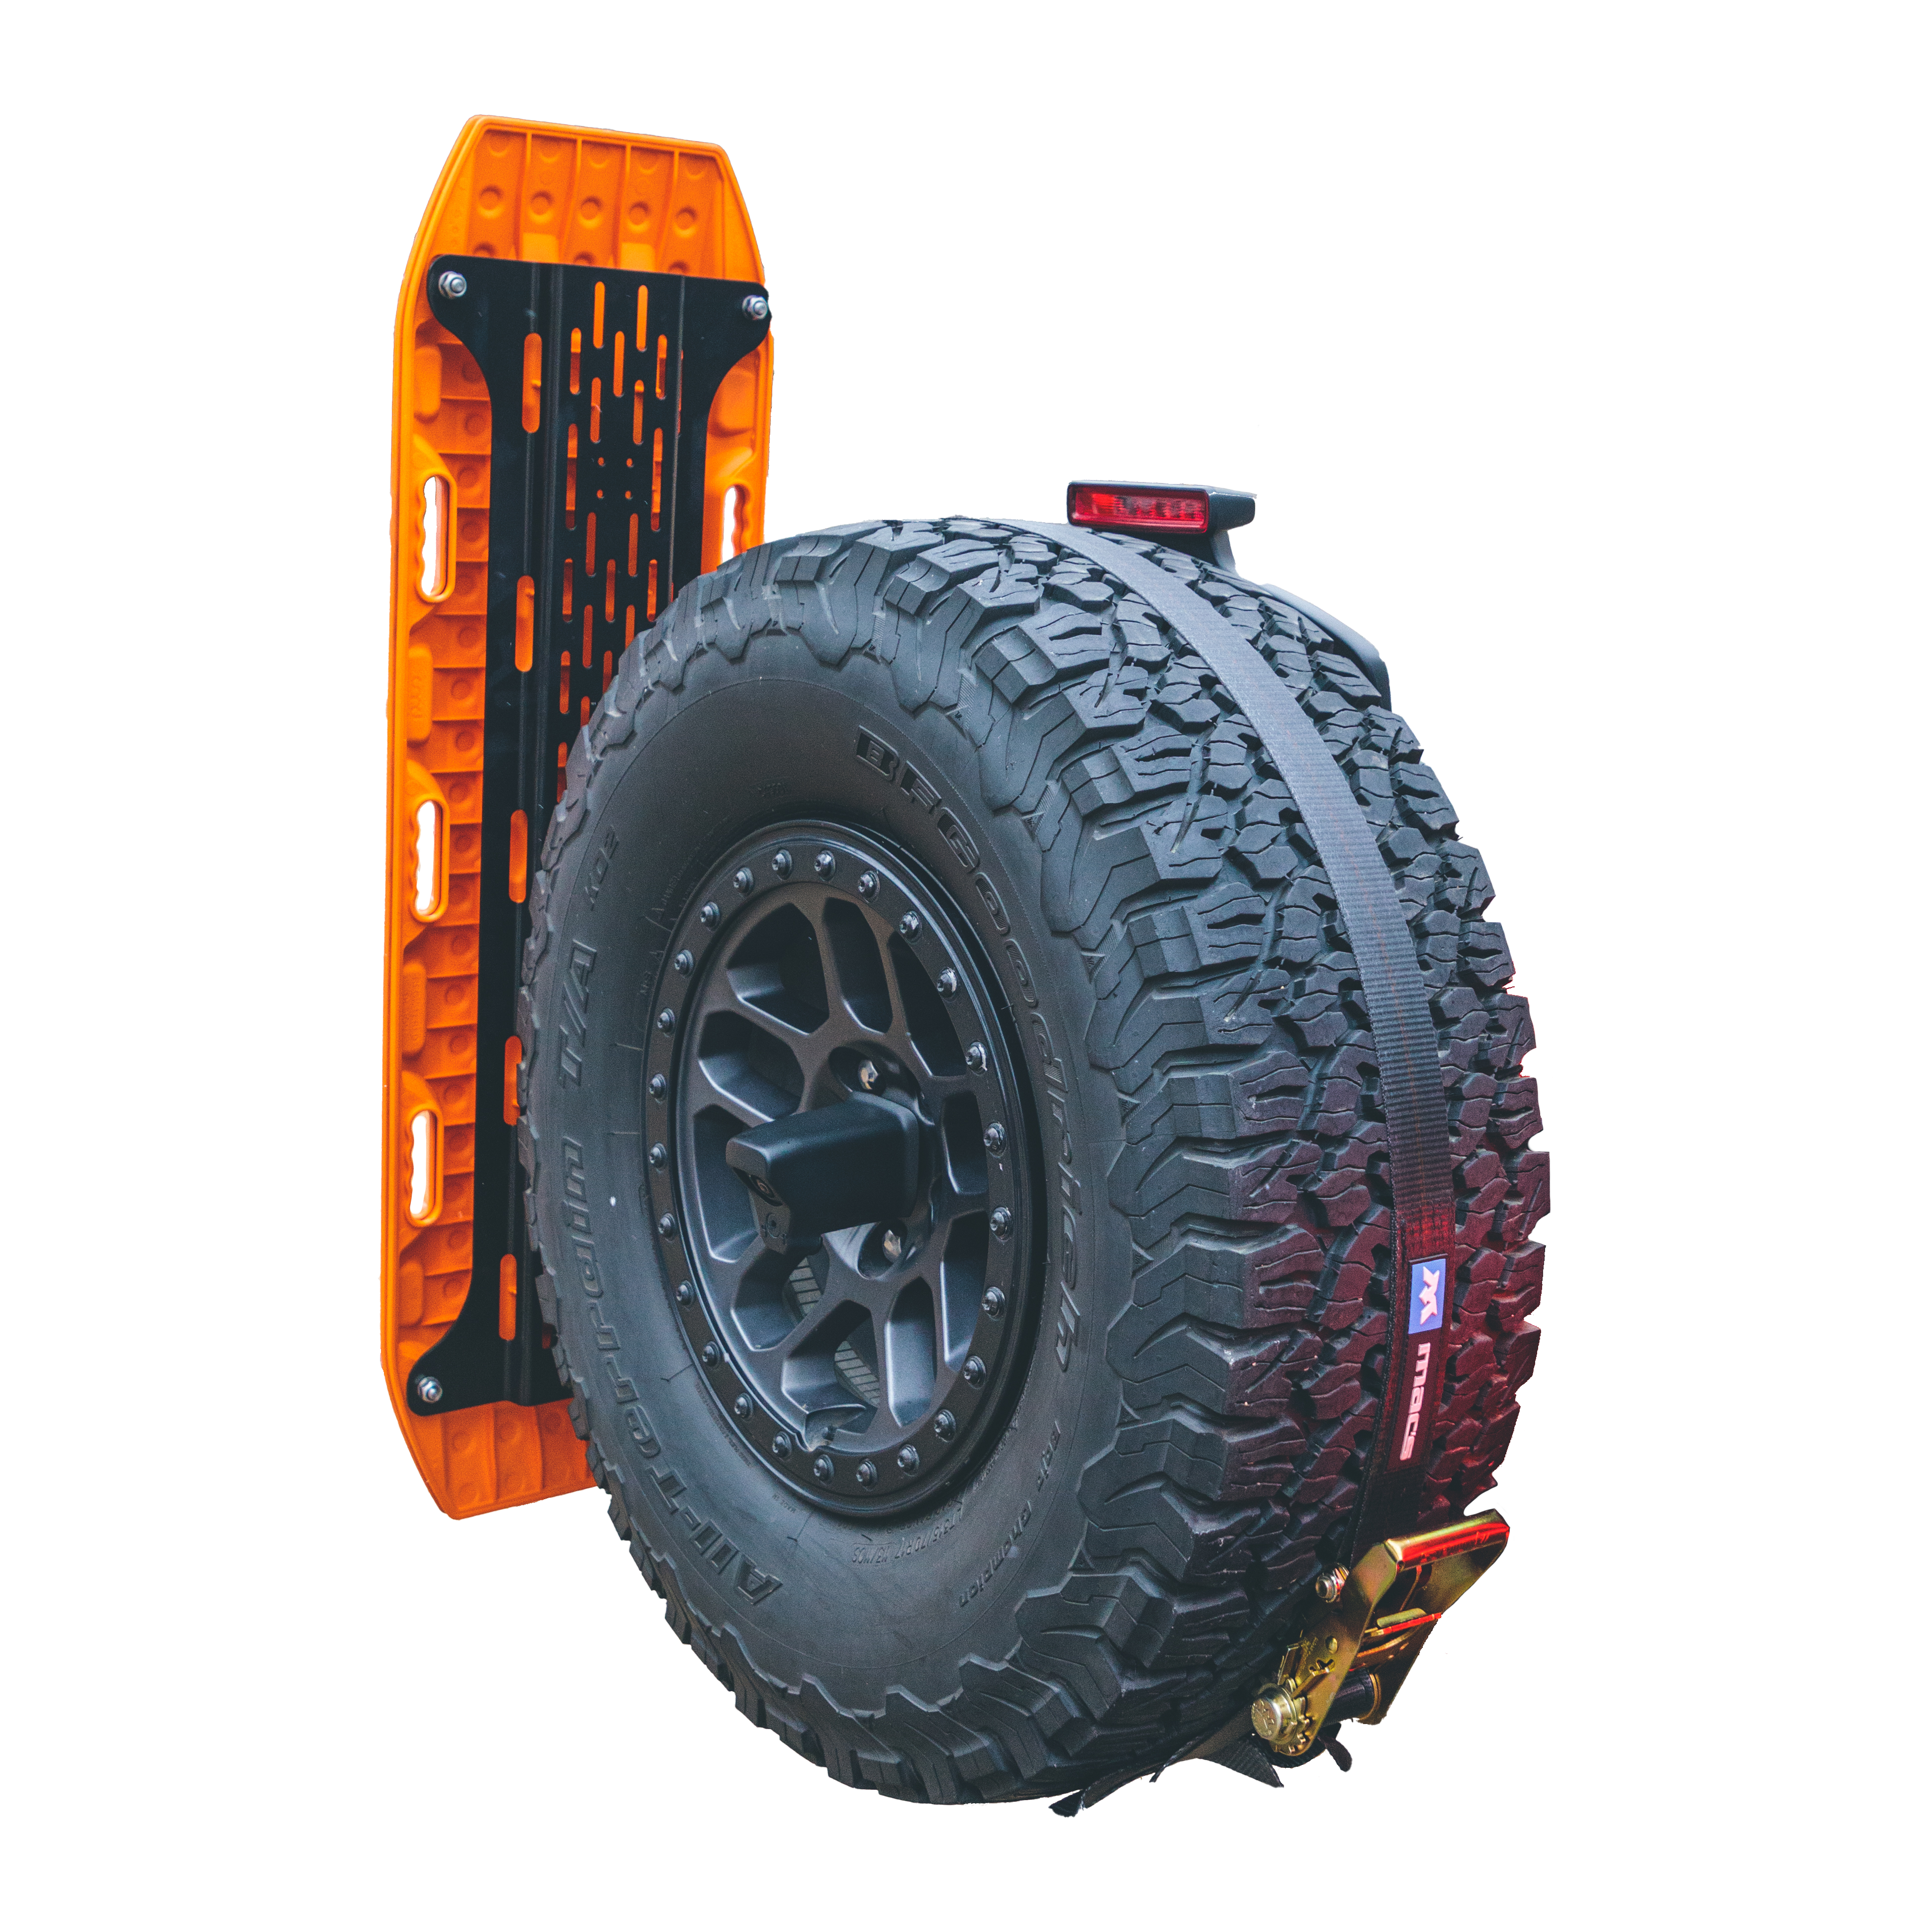 Overland Kitted Spare Tire MAXTRAX Mounting System For Vehicles To Retain Rear Visibility